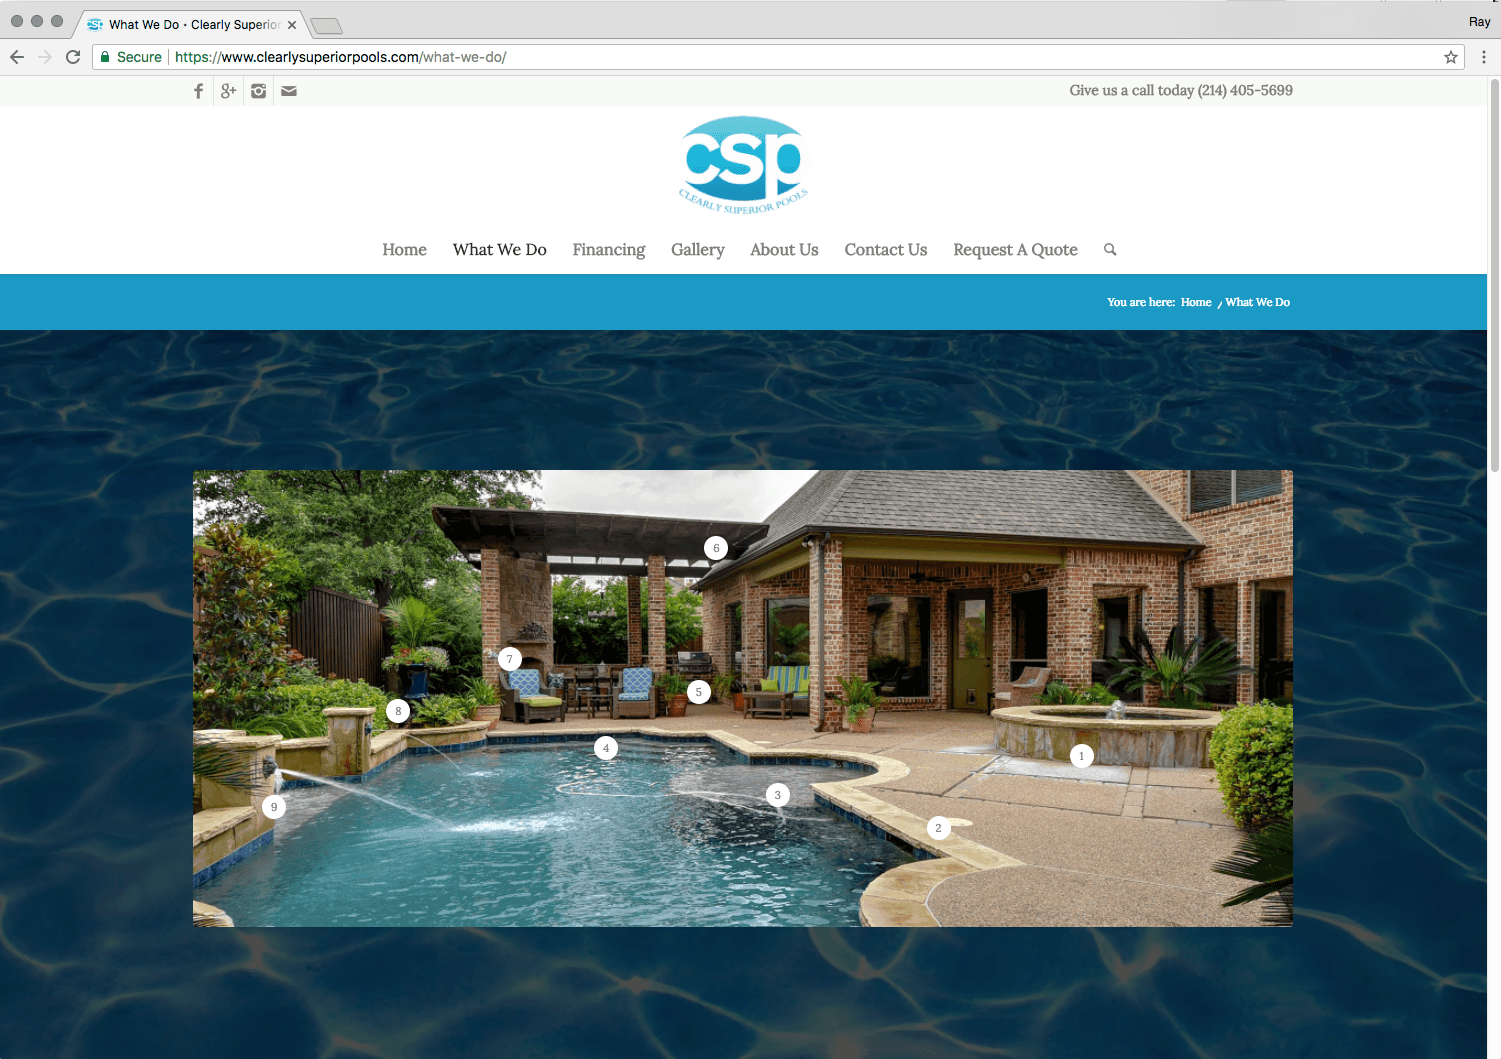 Clearly Superior Pools Website Design About Page